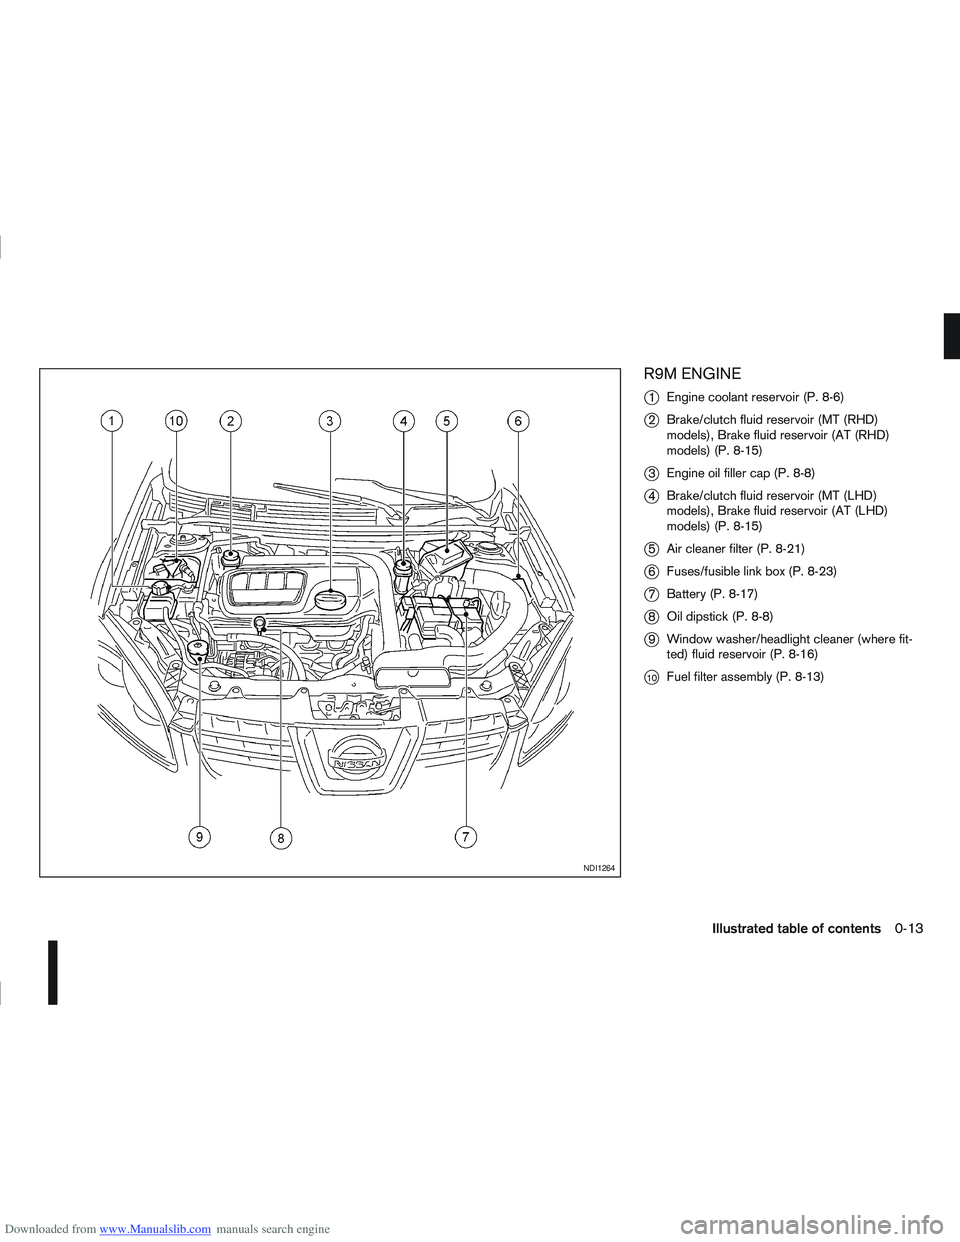 NISSAN QASHQAI 2007  Owners Manual Downloaded from www.Manualslib.com manuals search engine R9M ENGINE
j
1Engine coolant reservoir (P. 8-6)
j2Brake/clutch fluid reservoir (MT (RHD)
models), Brake fluid reservoir (AT (RHD)
models) (P. 8